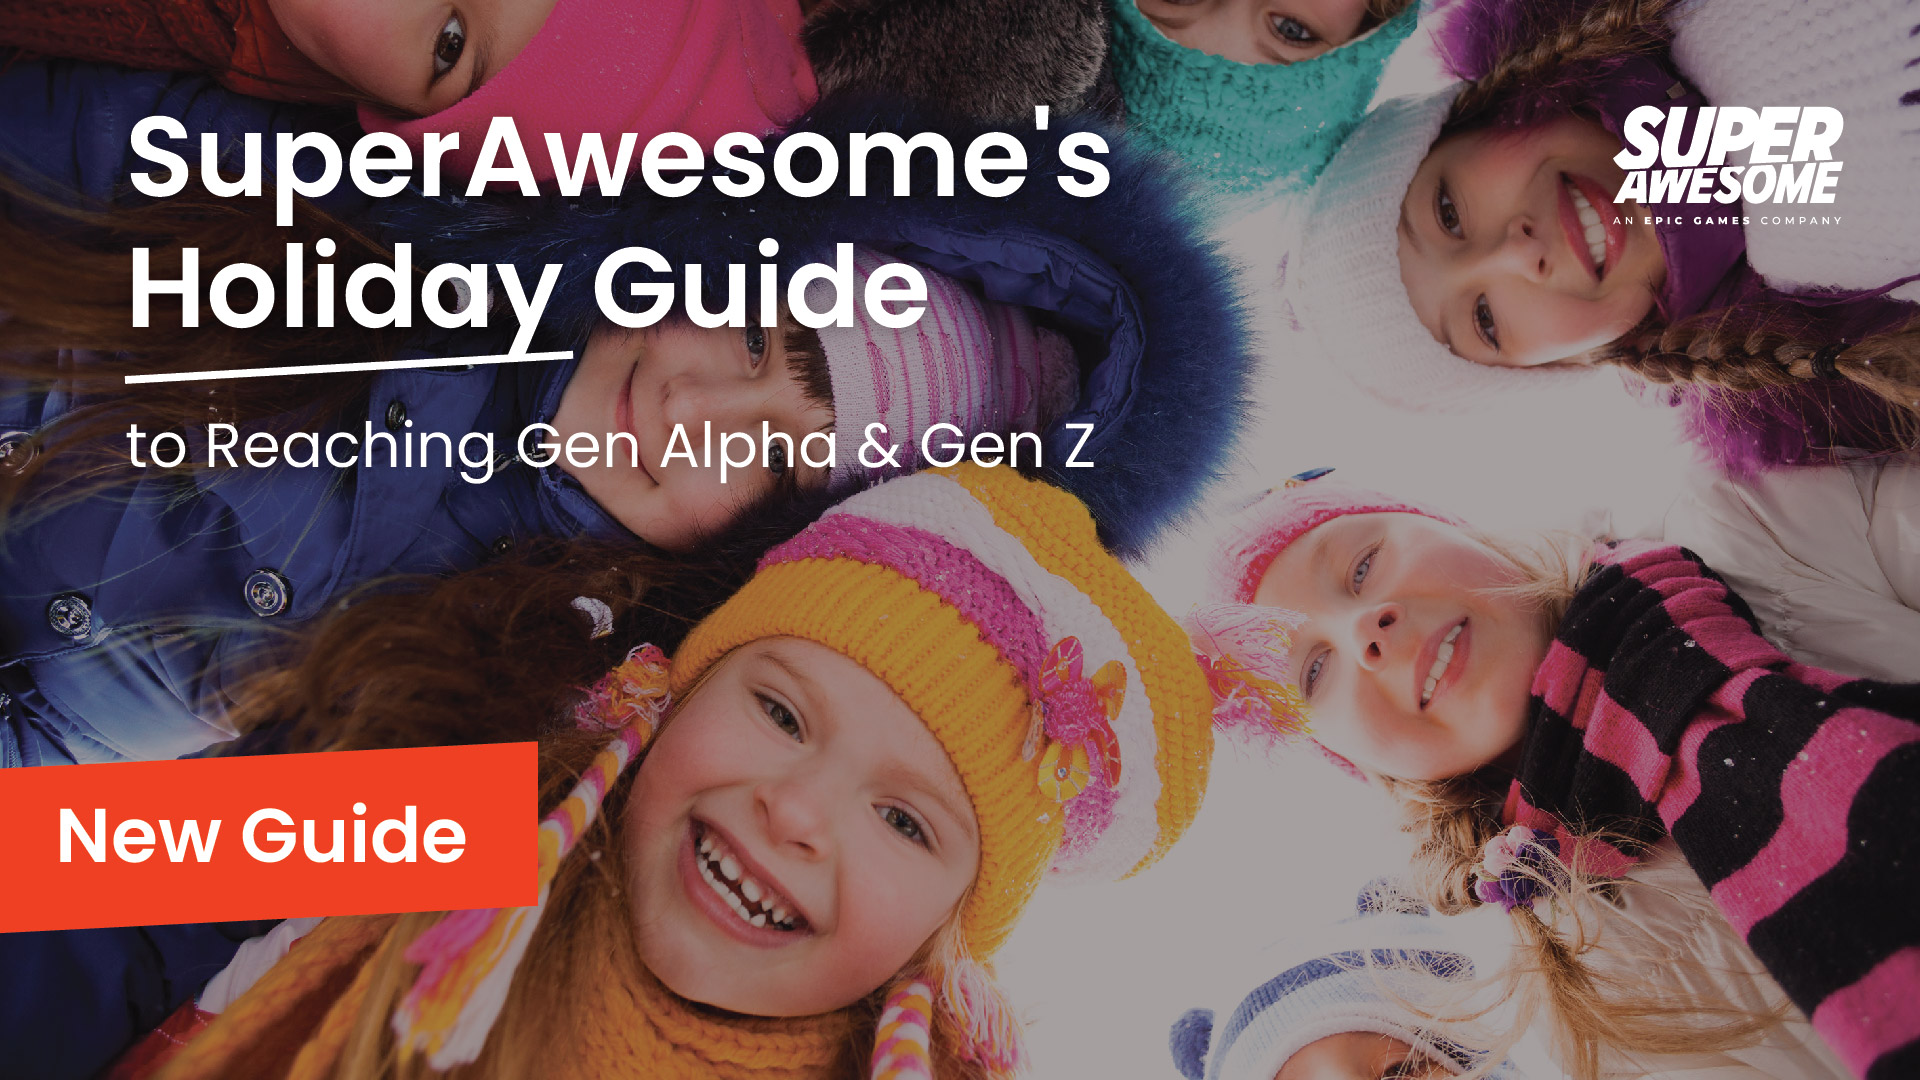 NEW Guide: SuperAwesome's Holiday Guide to Reaching Gen Alpha and Gen Z